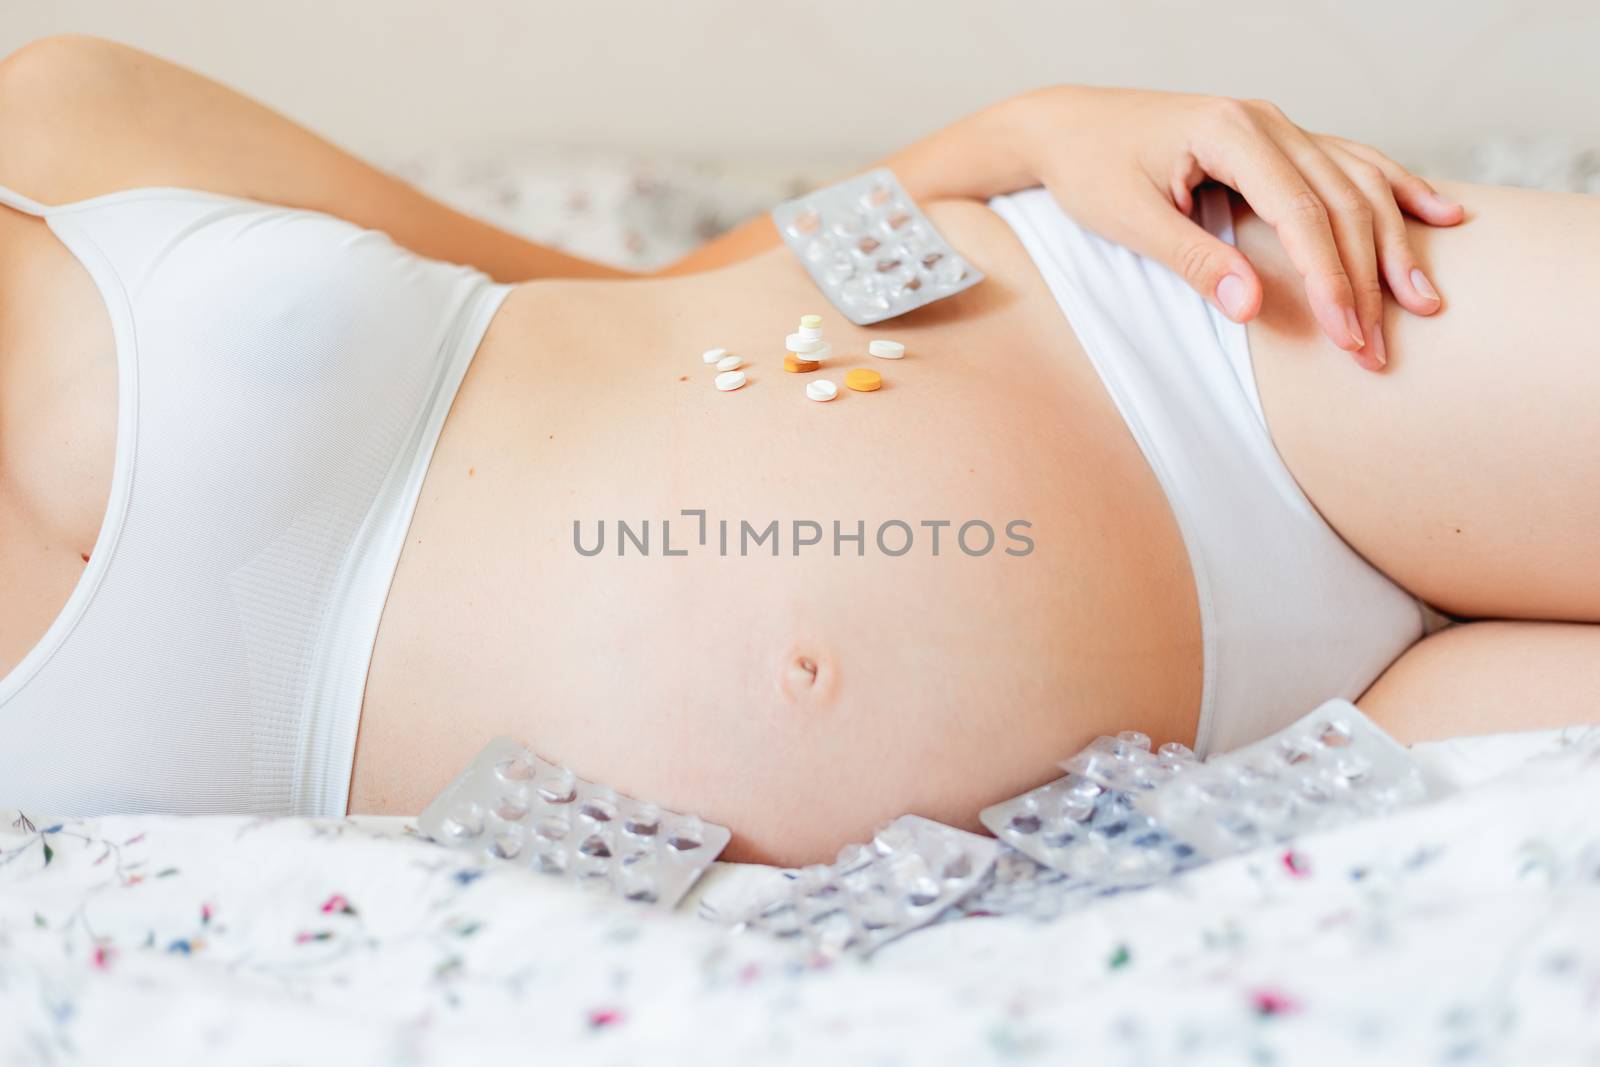 Pregnant woman in white underwear lying in bed with many pills. Young woman expecting a baby and have to take medicine.